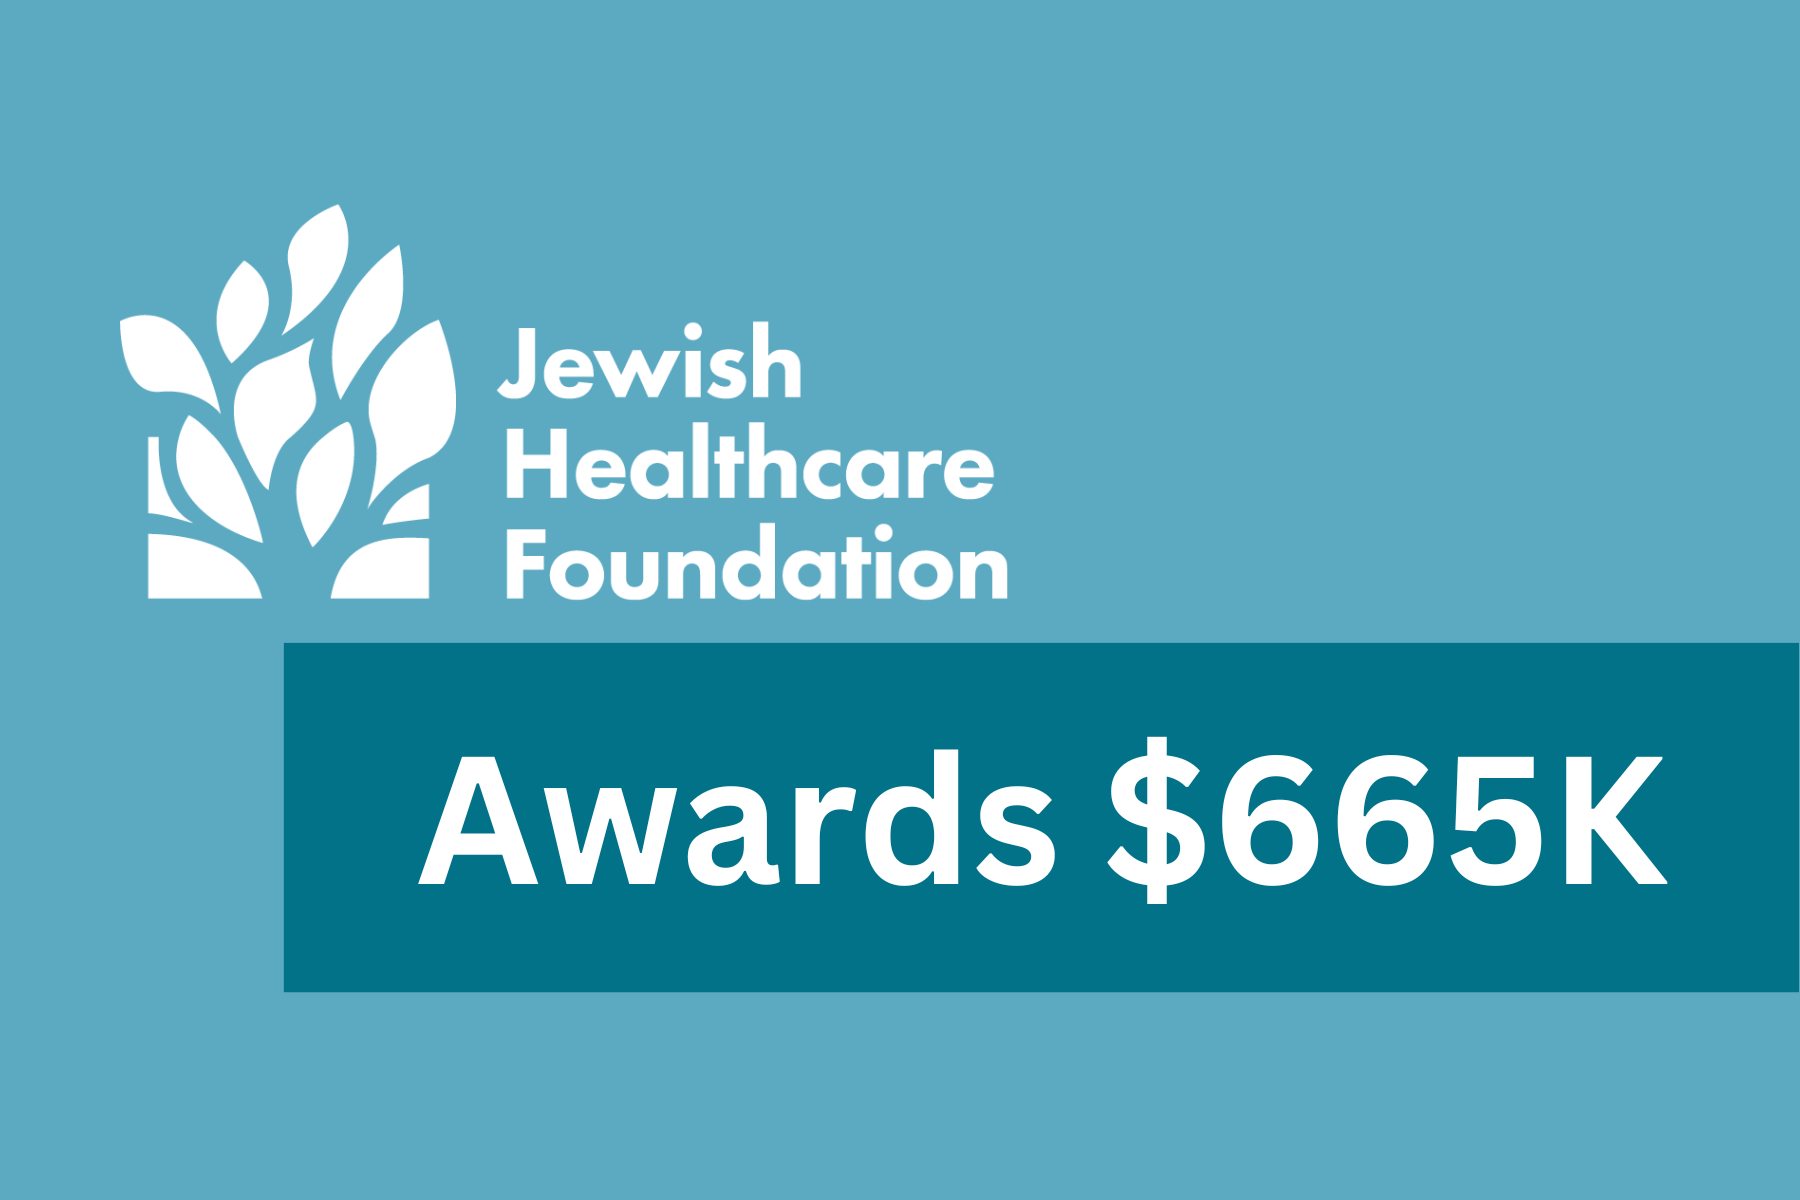 Jewish Healthcare Foundation Awards $665K in Grants to Address Critical Issues Affecting Vulnerable Older Adults